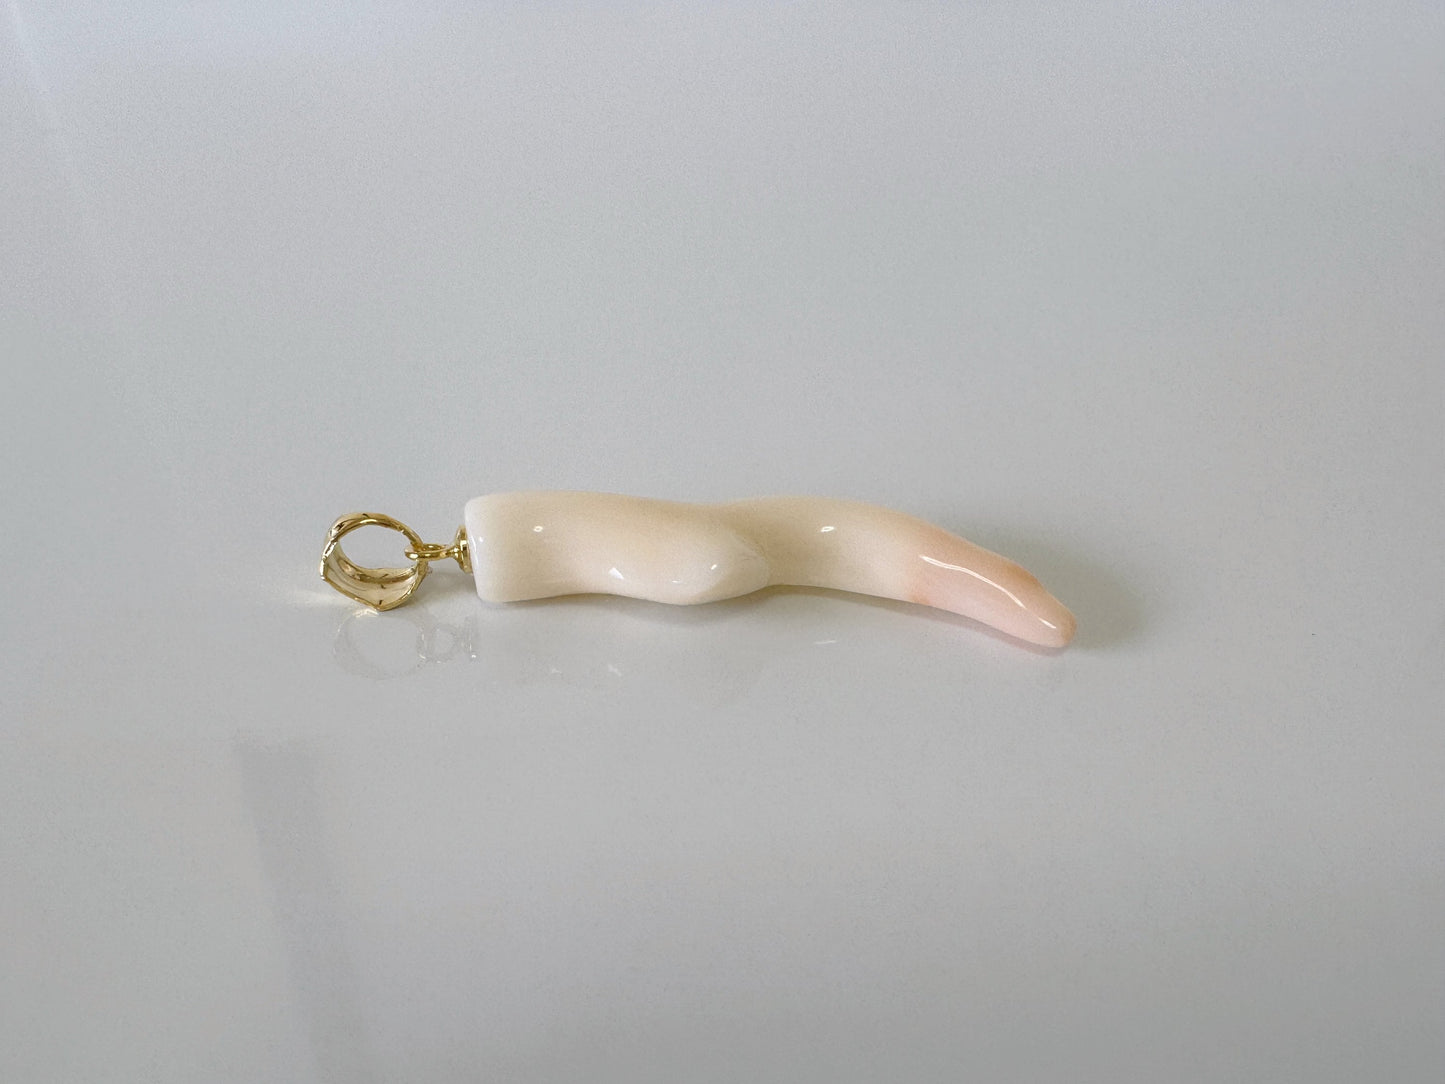 Natural White/Slightly pink Coral Branch Pendant, Natural color, Japanese White Precious Coral, Silver Bail (gold-plated)